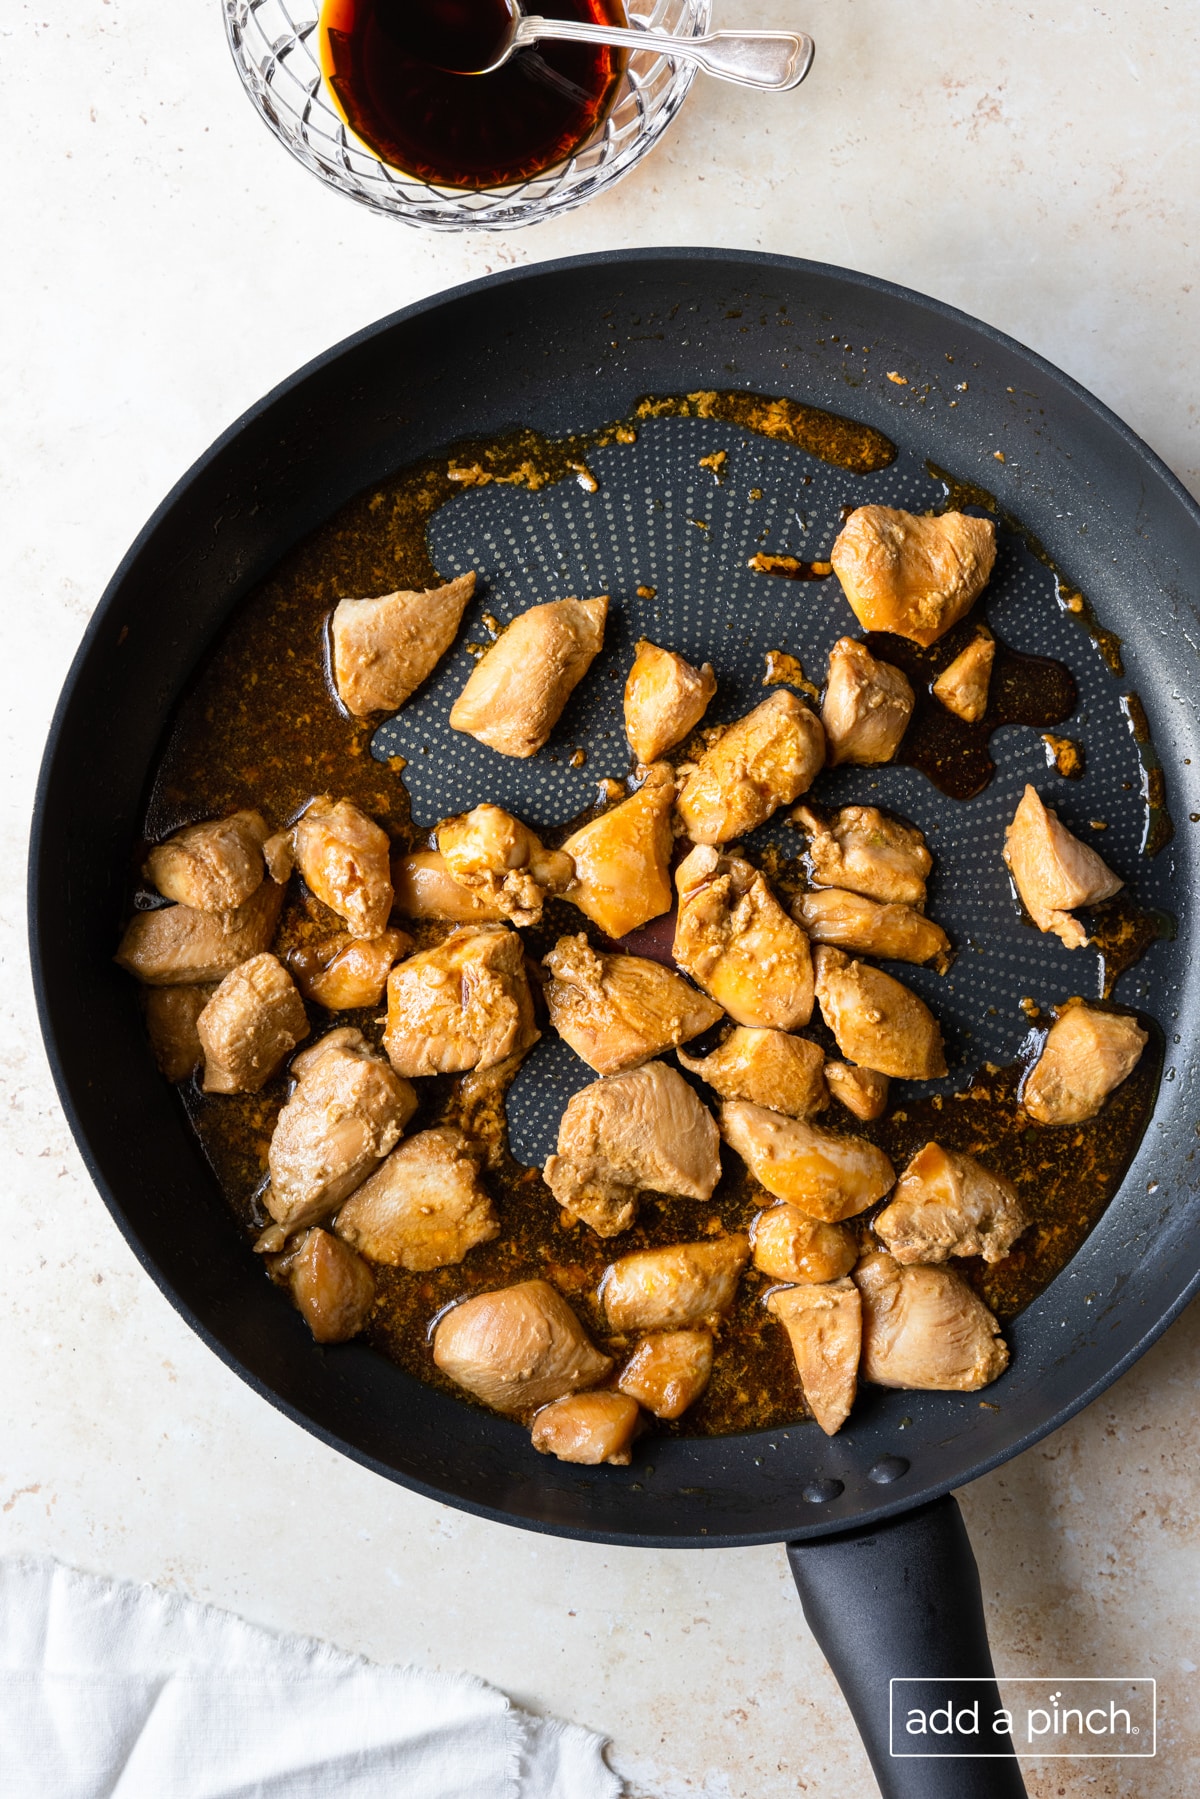 Chicken cooked in a skillet with teriyaki sauce.